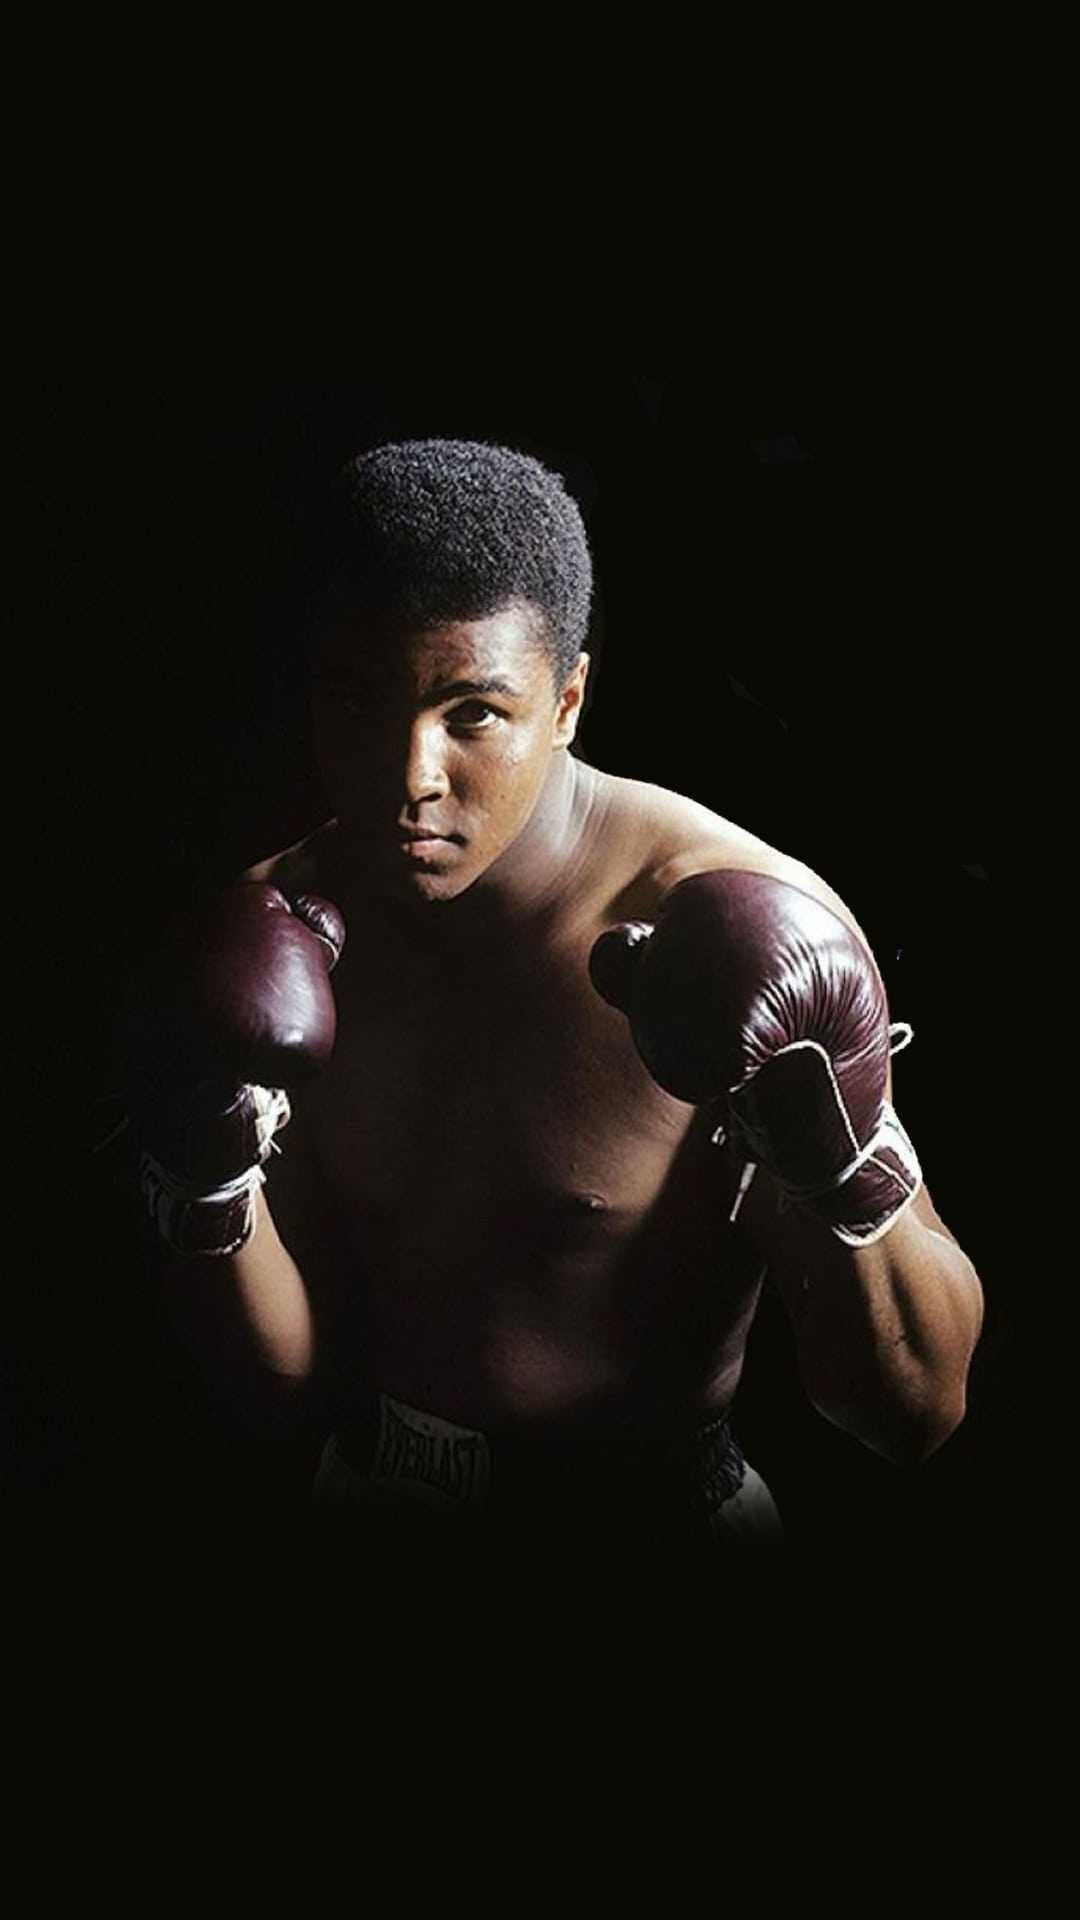 Boxing: Muhammad Ali, the greatest heavyweight fighter of all time. 1080x1920 Full HD Wallpaper.